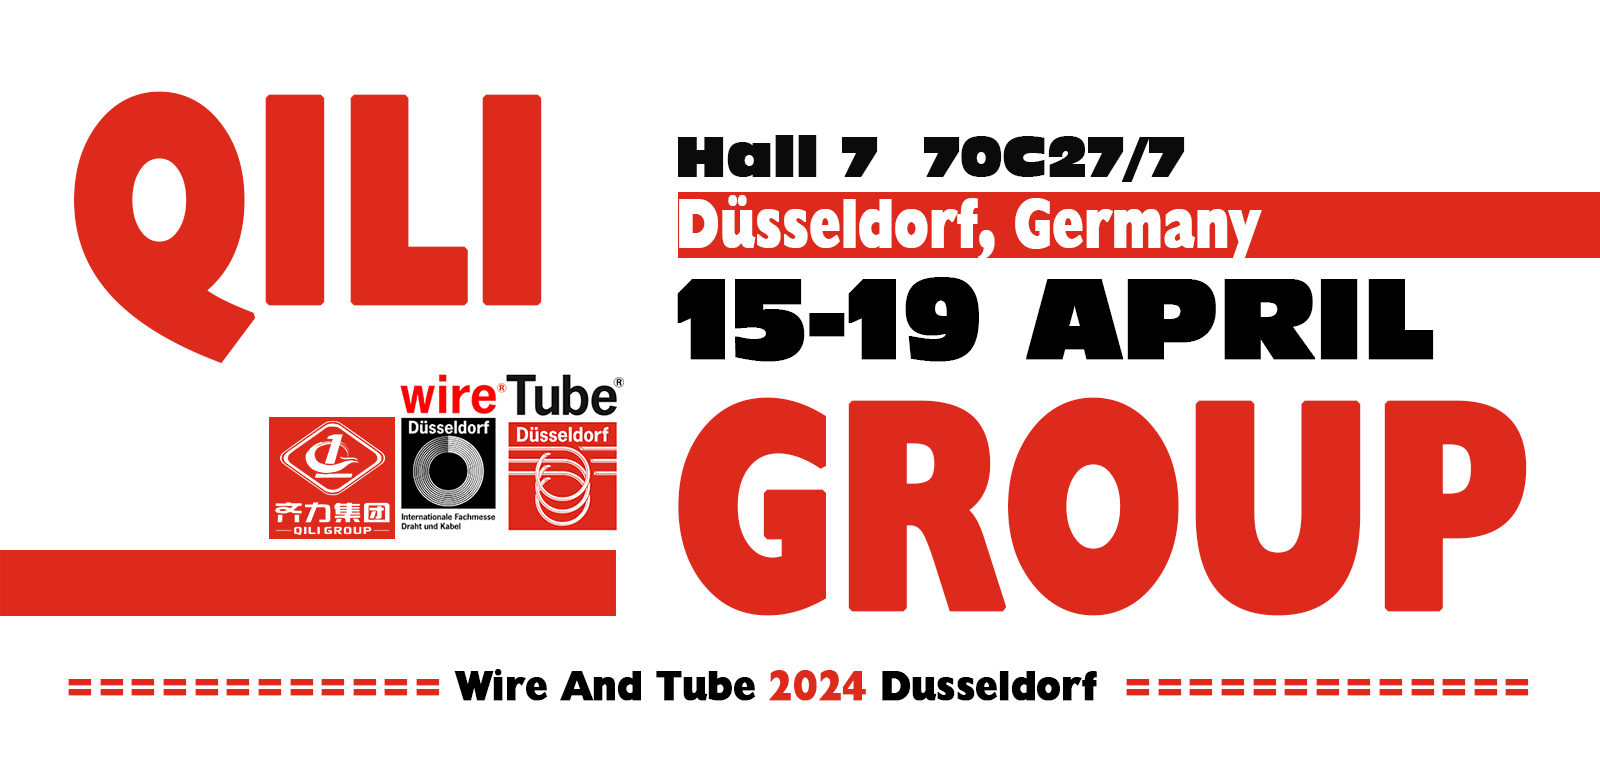 QLI will be attending Wire And Tube 2024 Dusseldorf